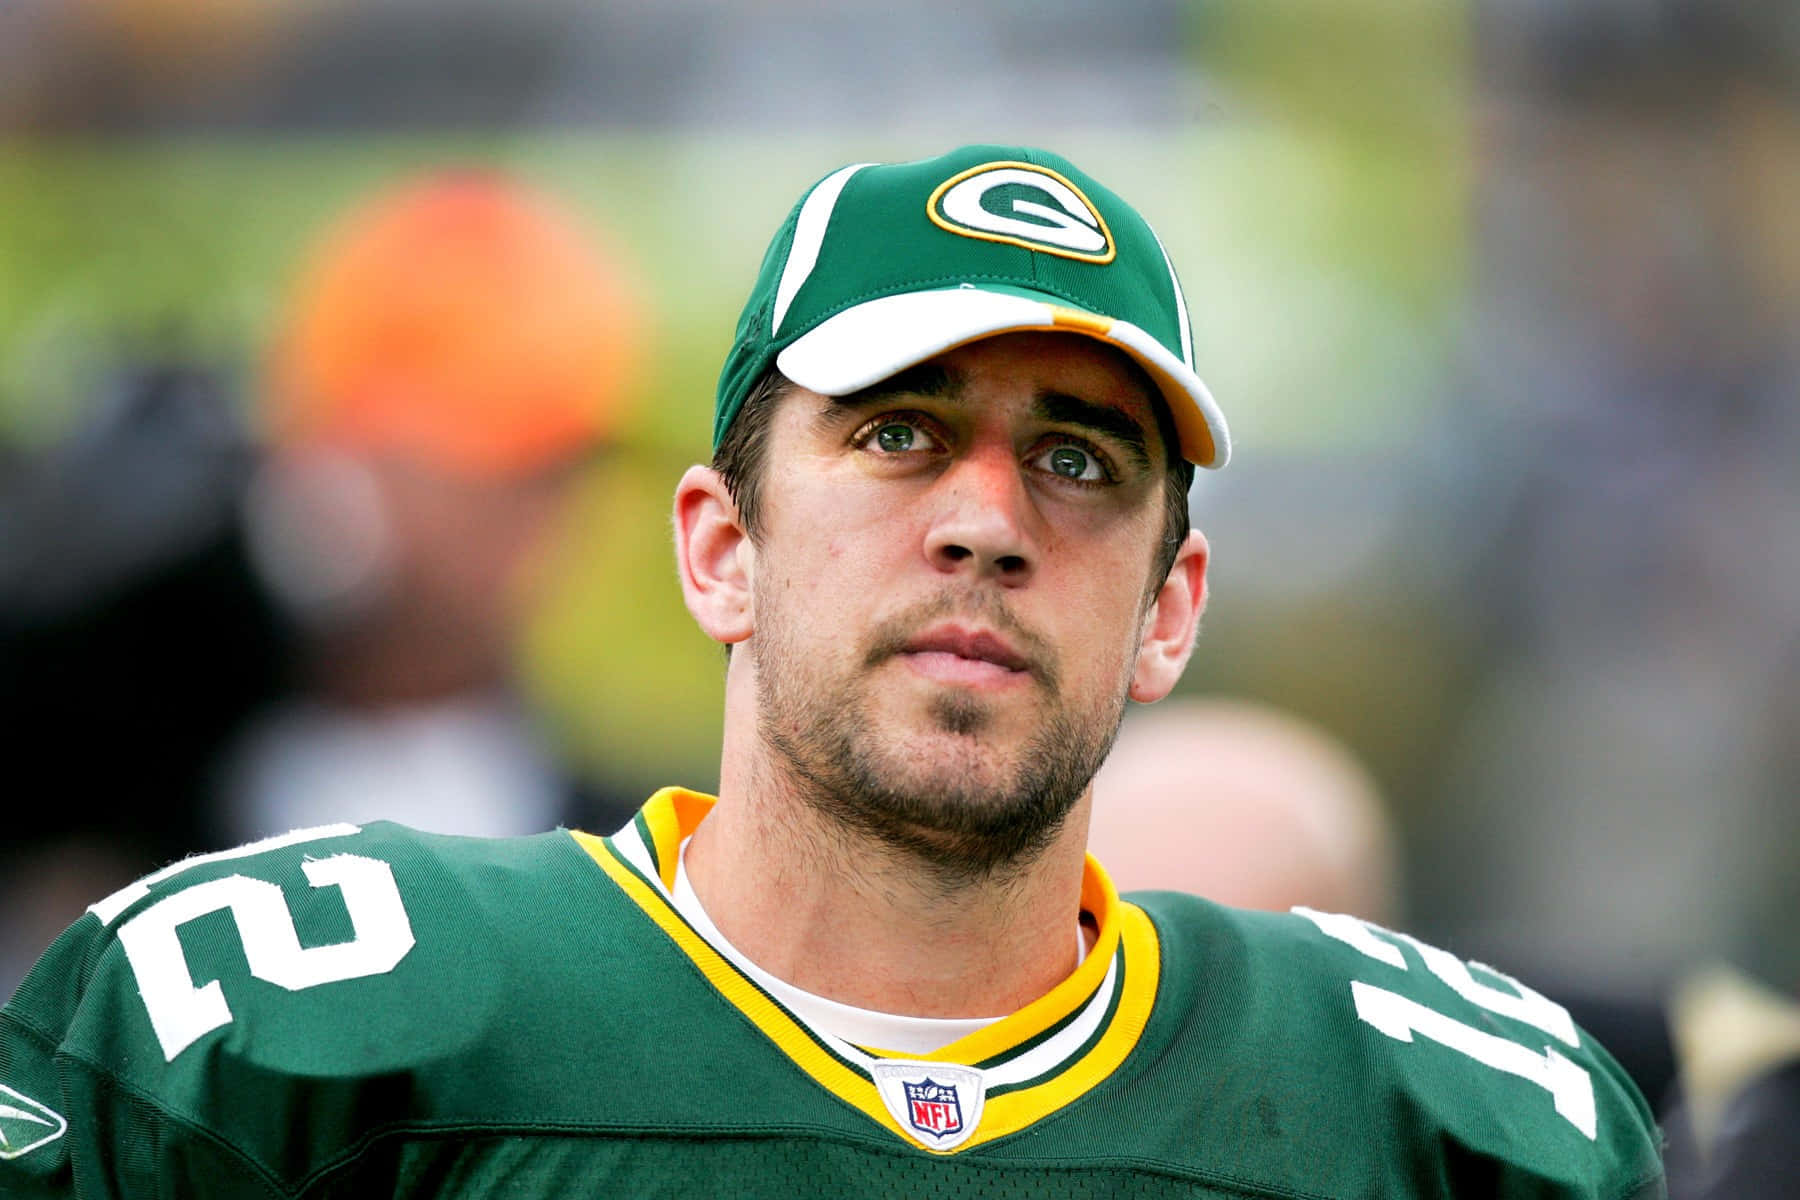 Aaron Rodgers, Quarterback for the Green Bay Packers